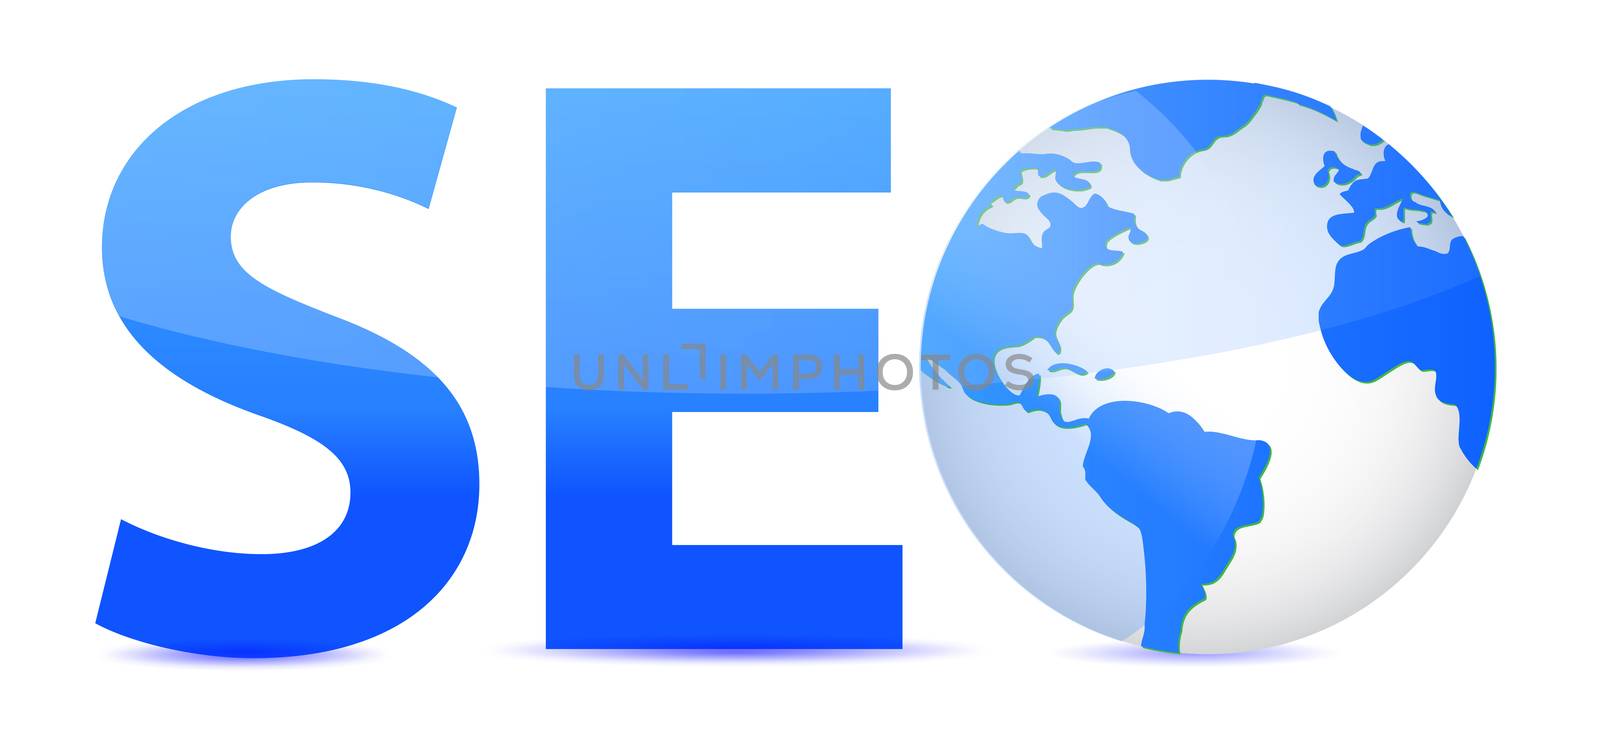 search engine optimization concept seo by alexmillos